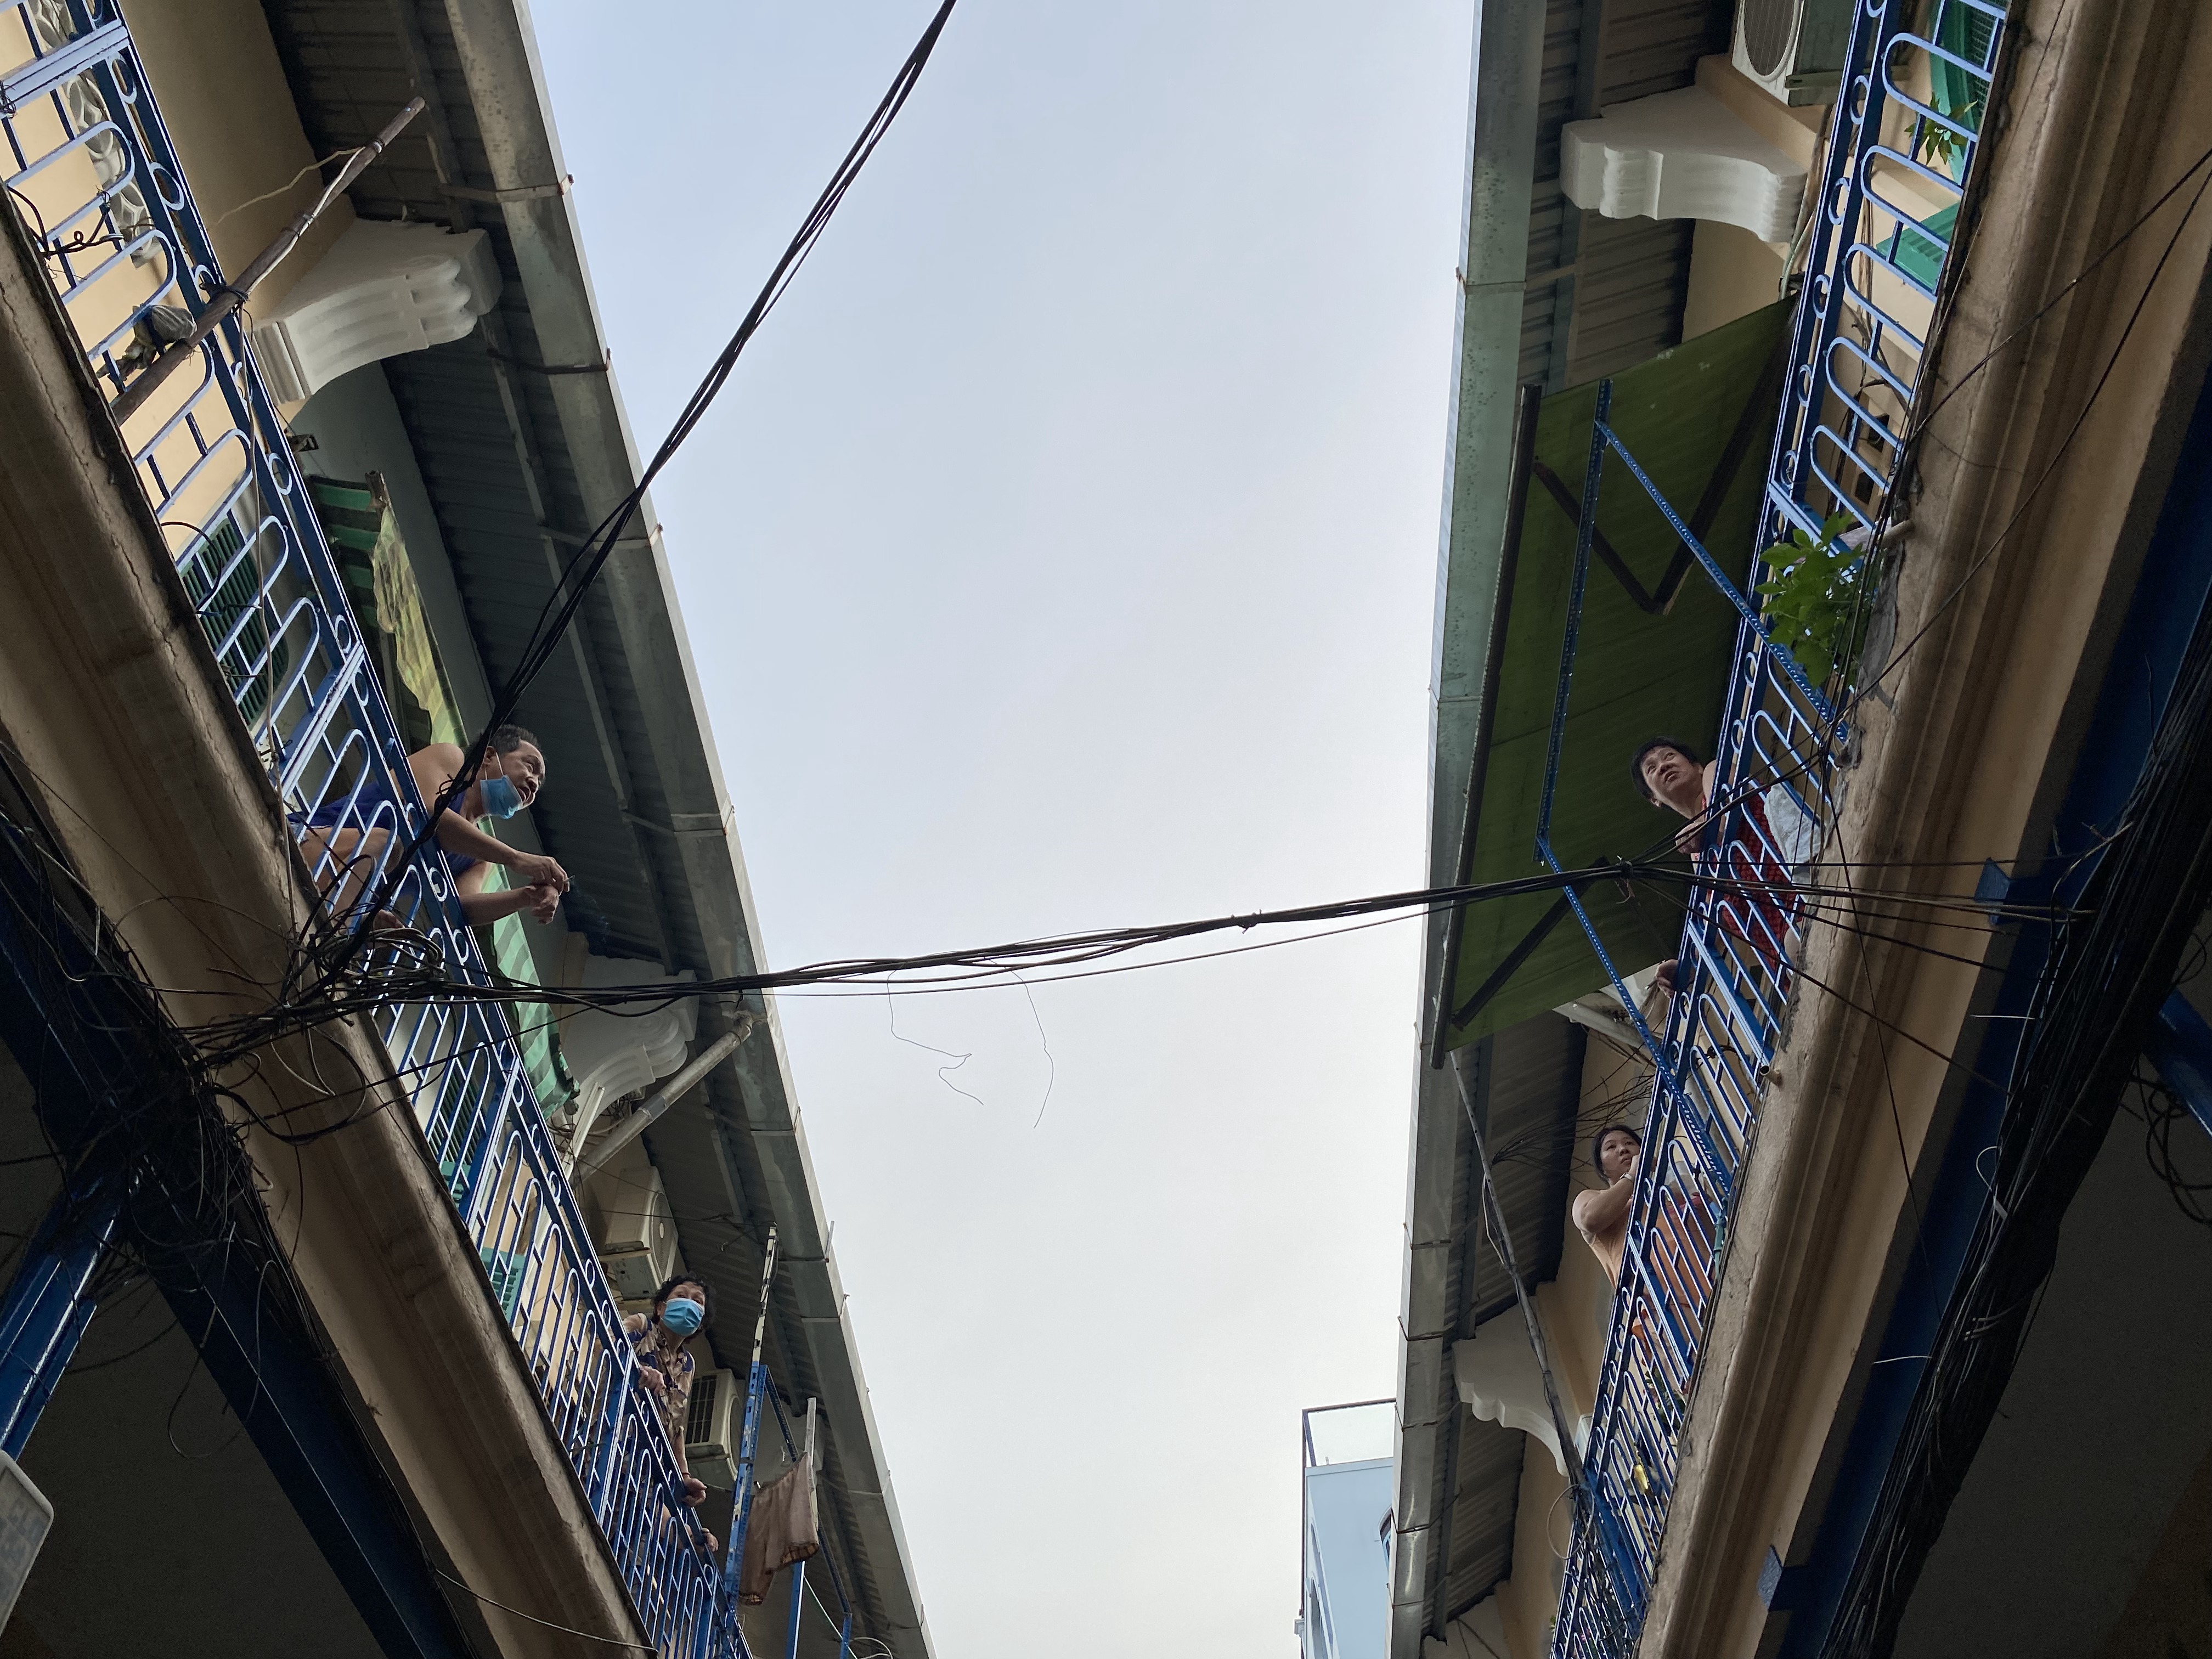 Residents of the Hao Sy Phuong residential area in Ho Chi Minh City chat on the building’s balcony. This apartment block is over 111 years old. Photo: Le Van / Tuoi Tre